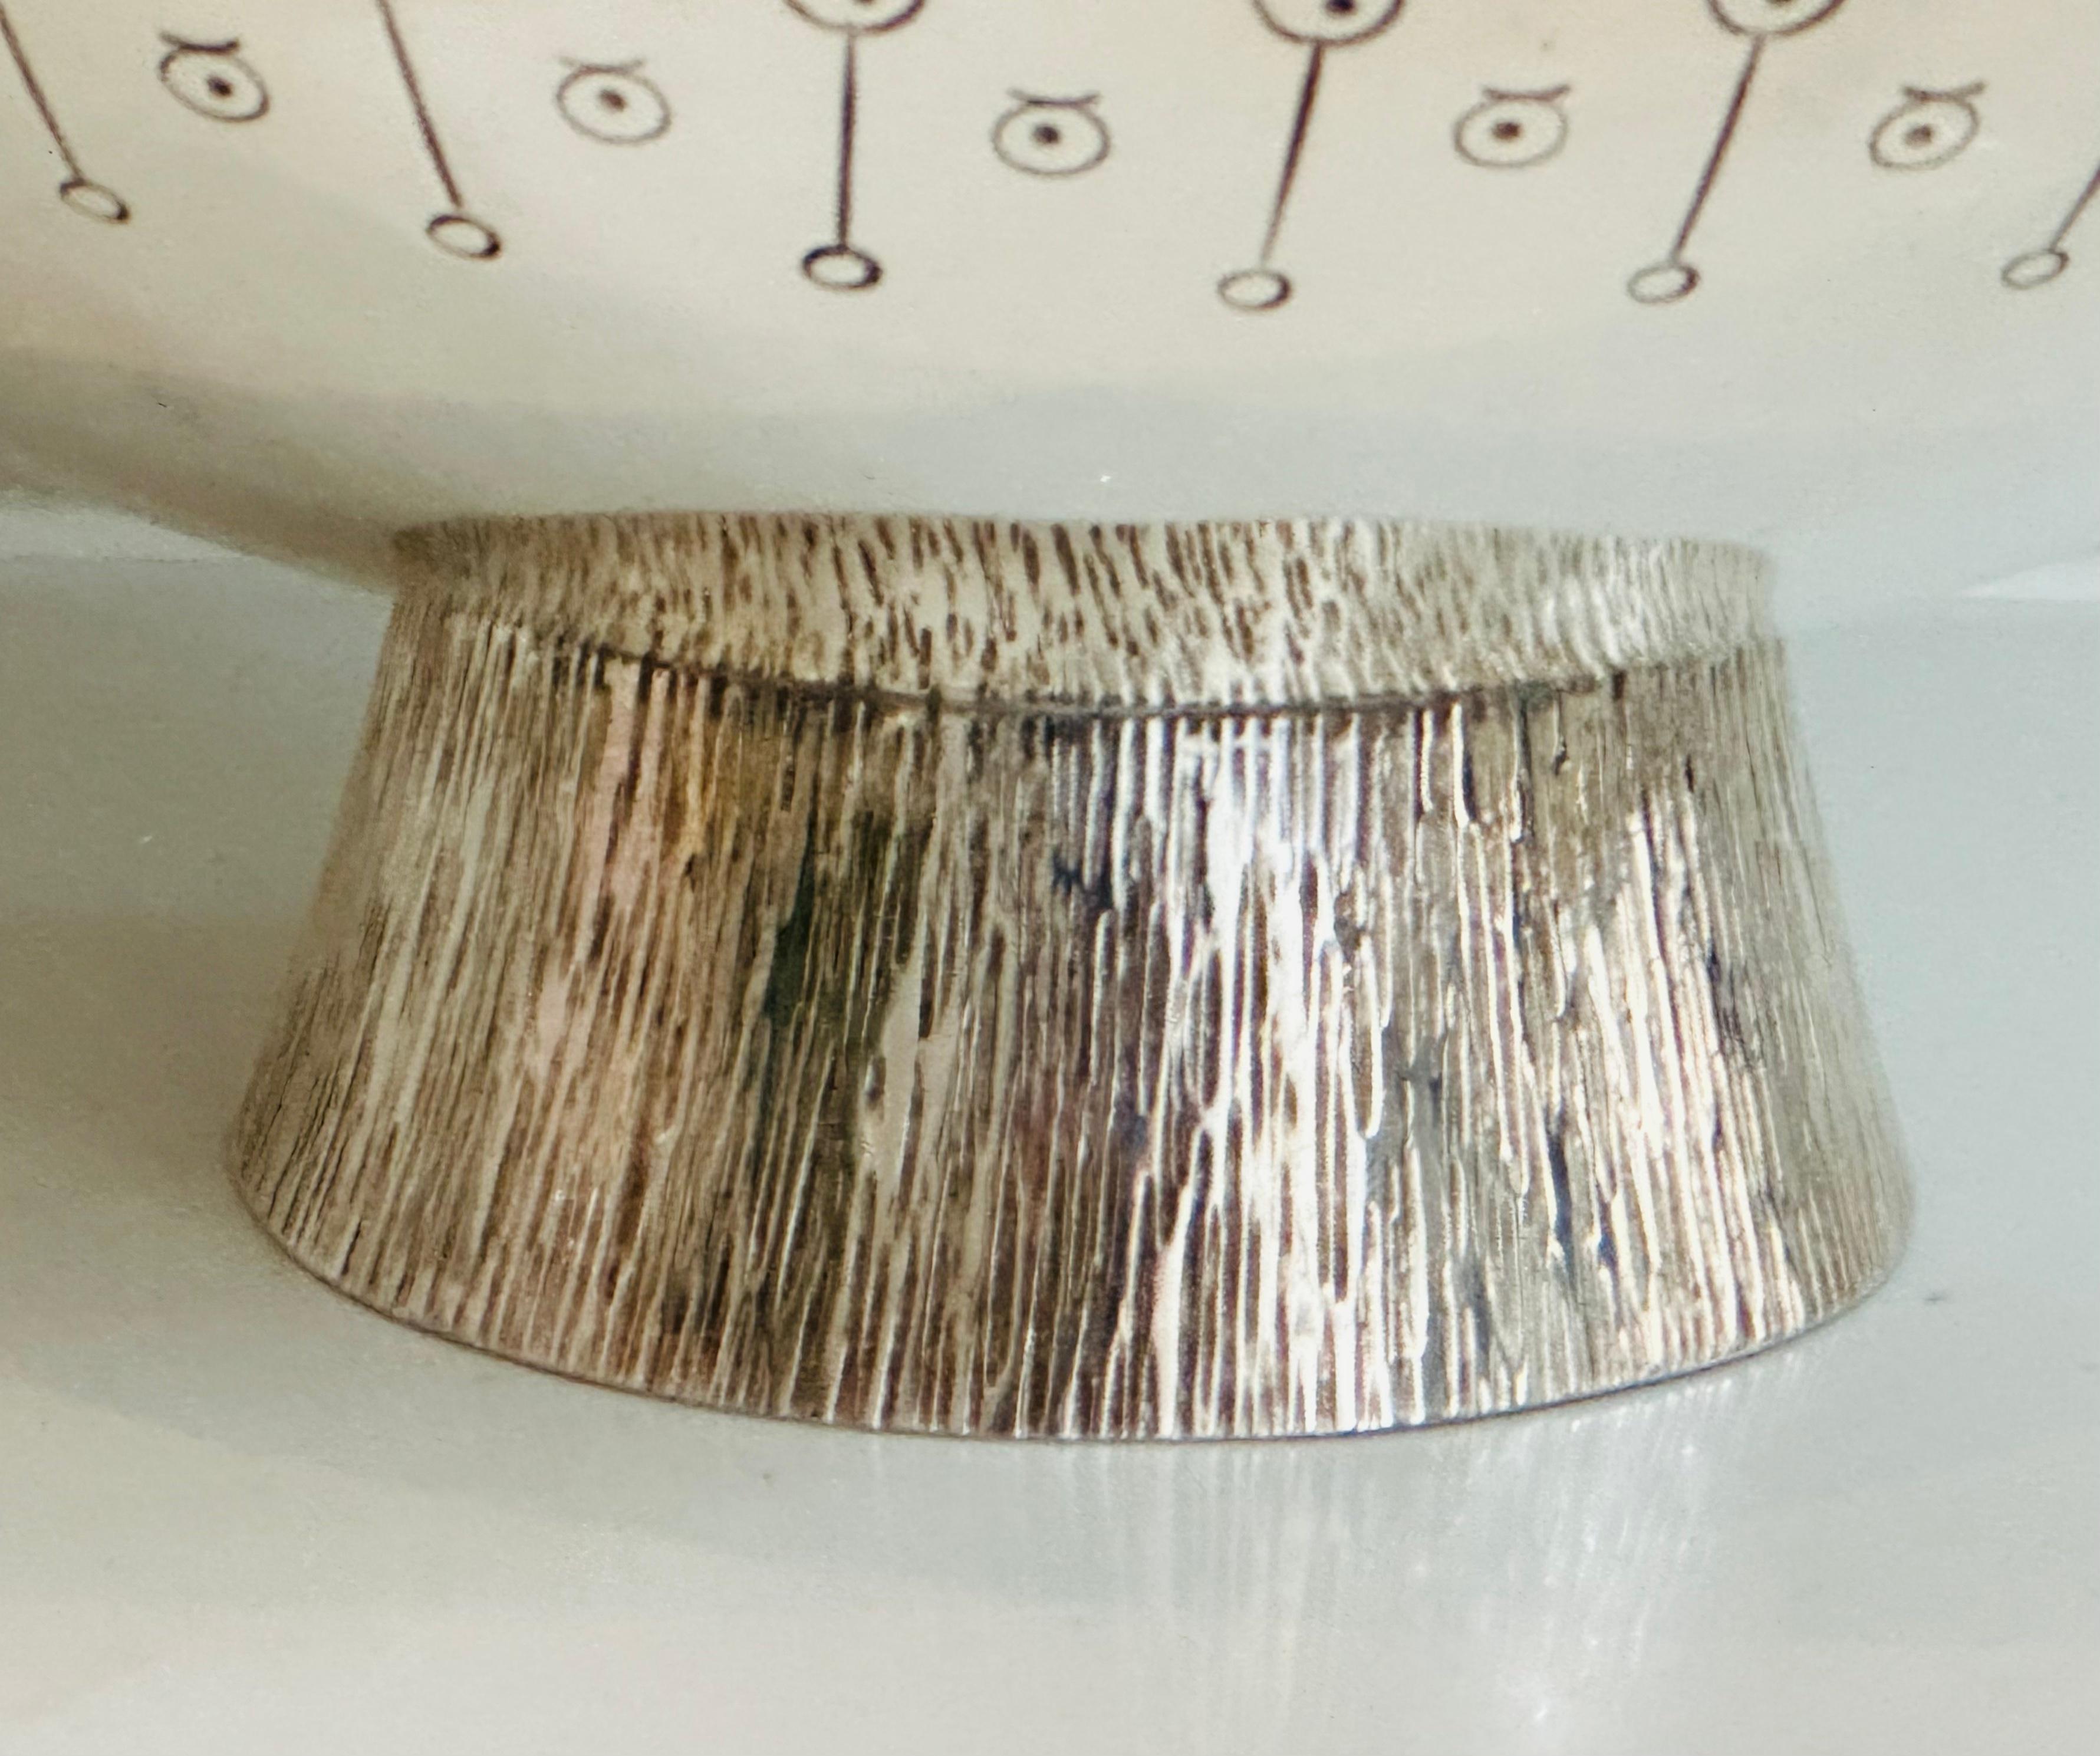 1980s English Silver Plated Decorative Hand-Hammered Serving or Display Bowl 9